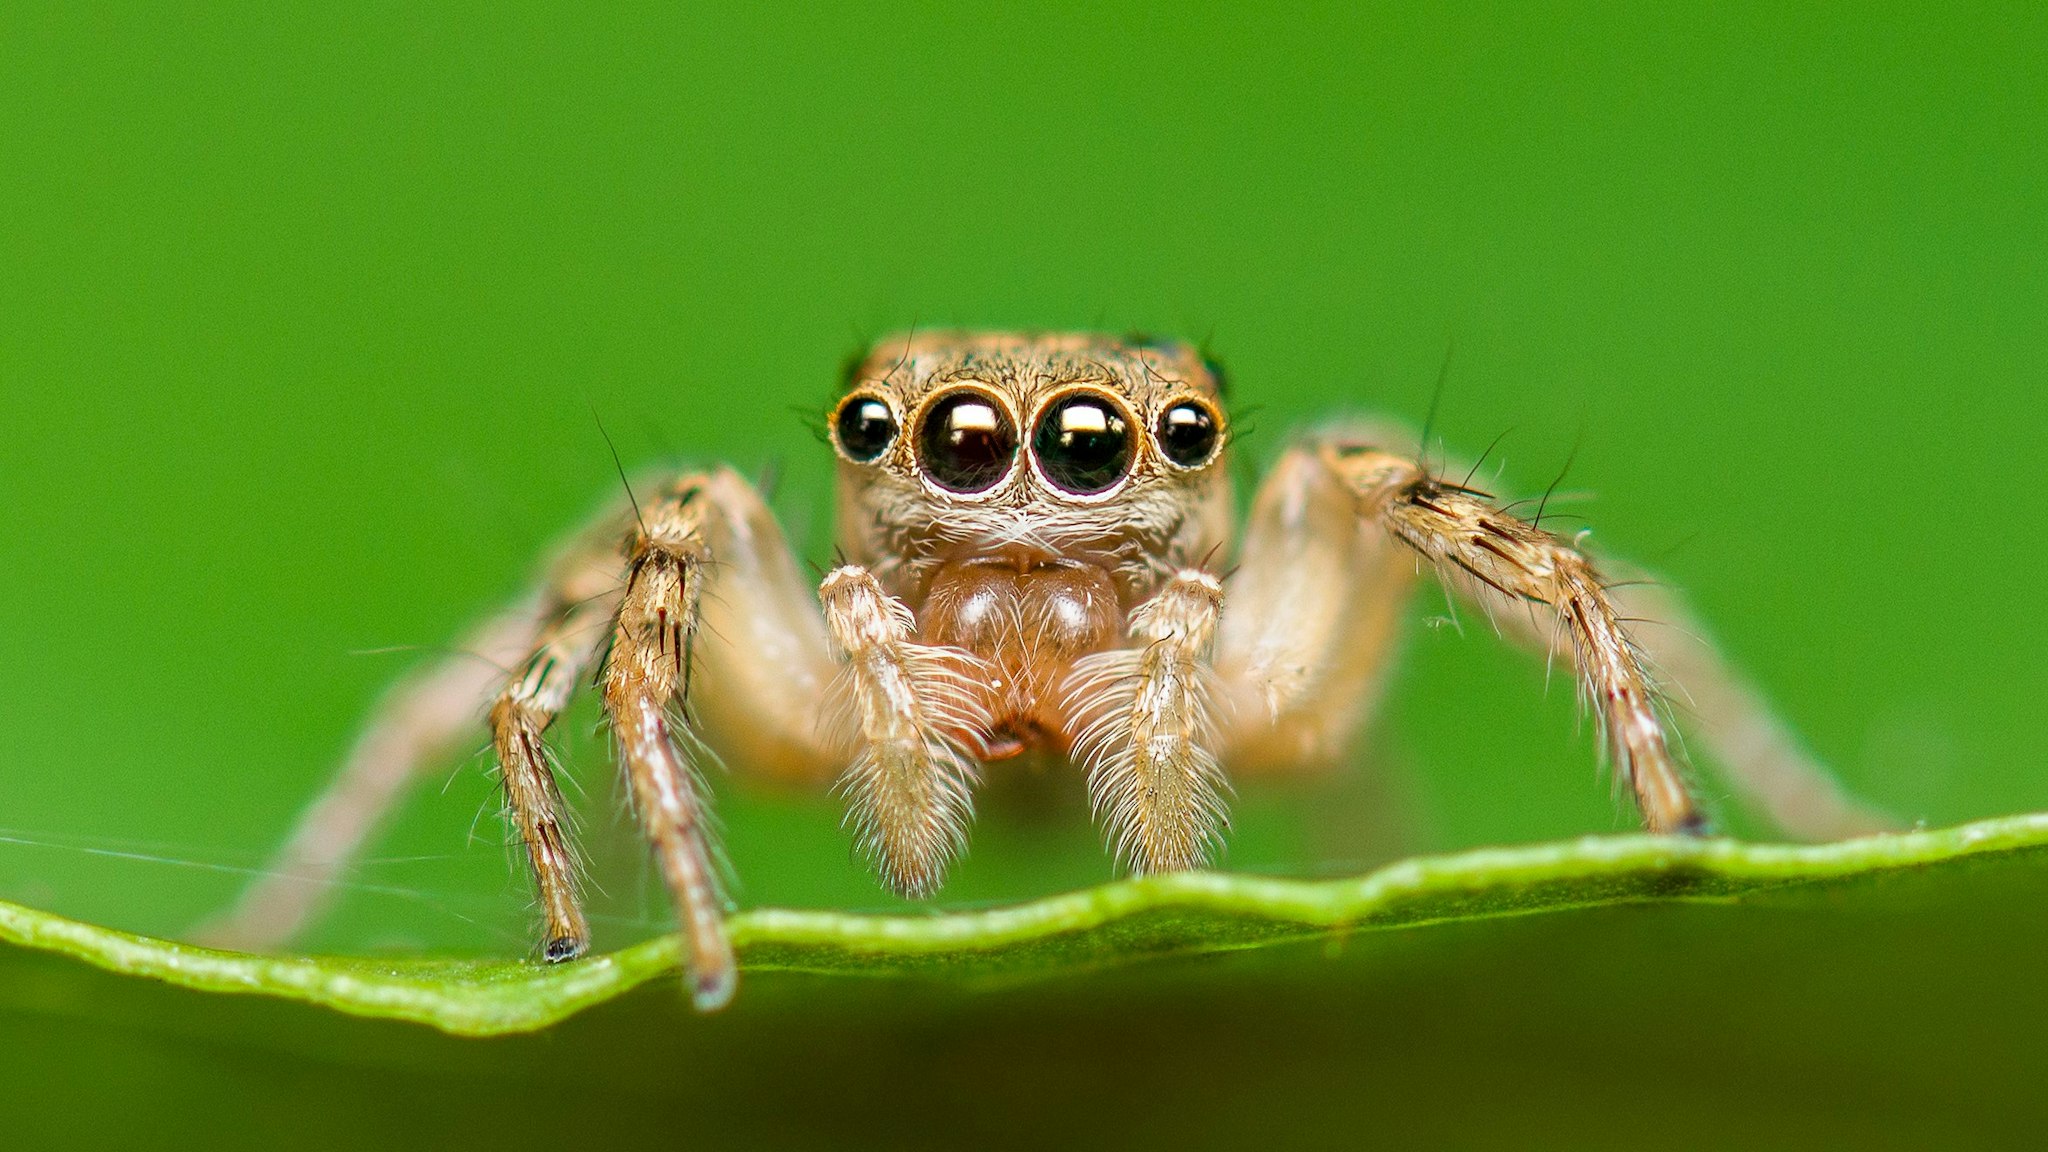 Close-up of Salticus scenicus or jumping spider on leaf